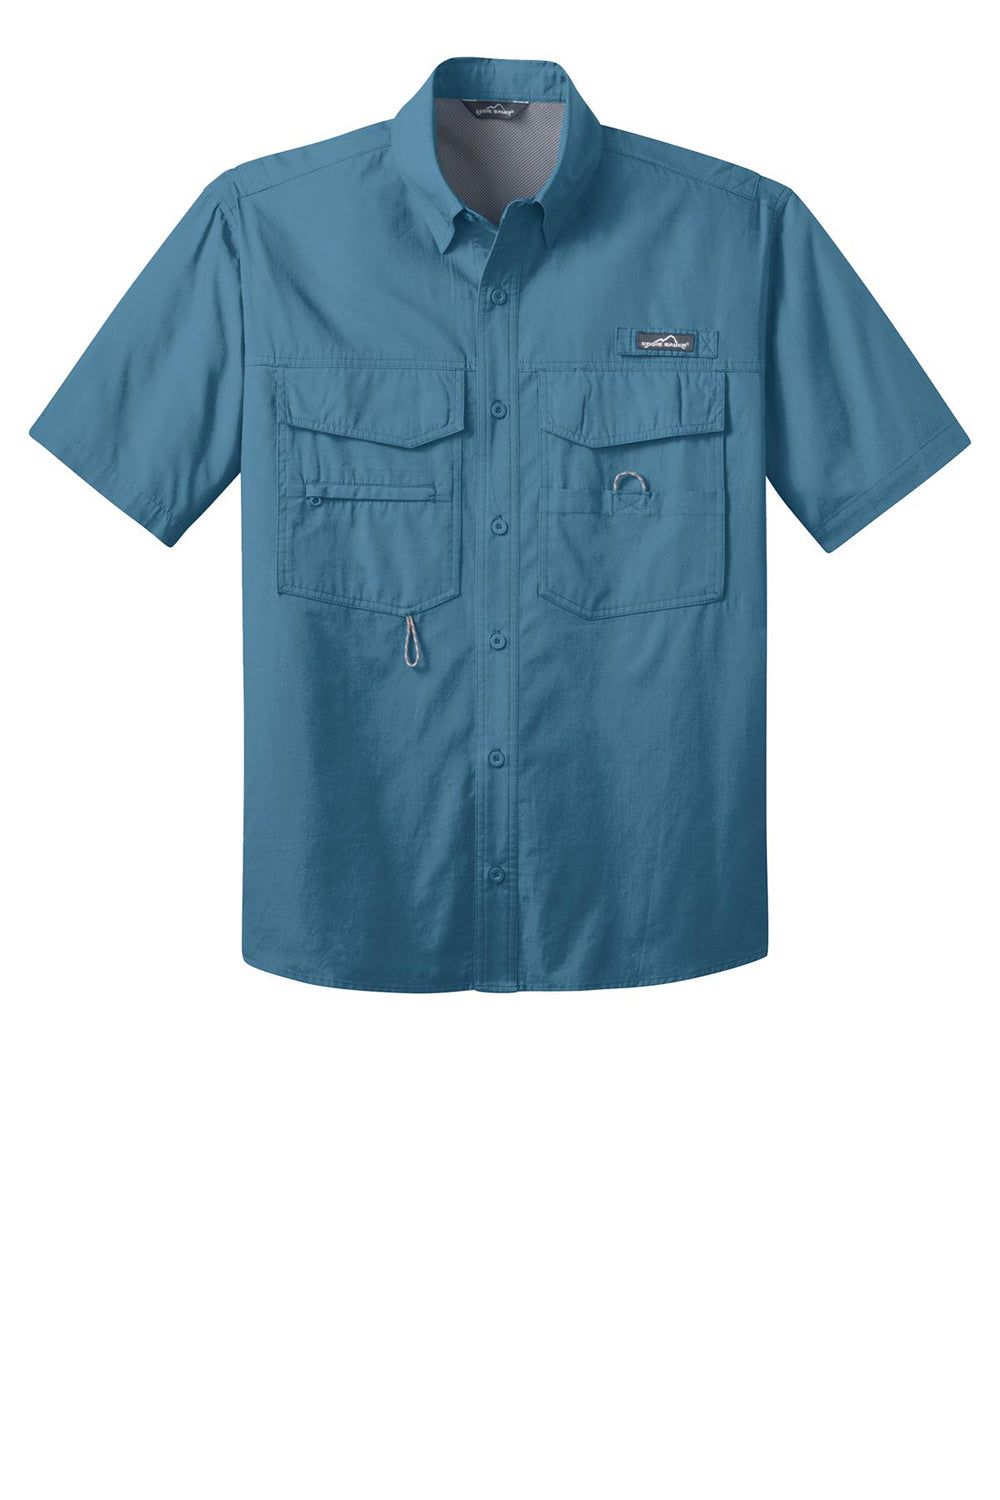 Eddie Bauer EB608 Mens Fishing Short Sleeve Button Down Shirt w/ Double Pockets Blue Gill Flat Front